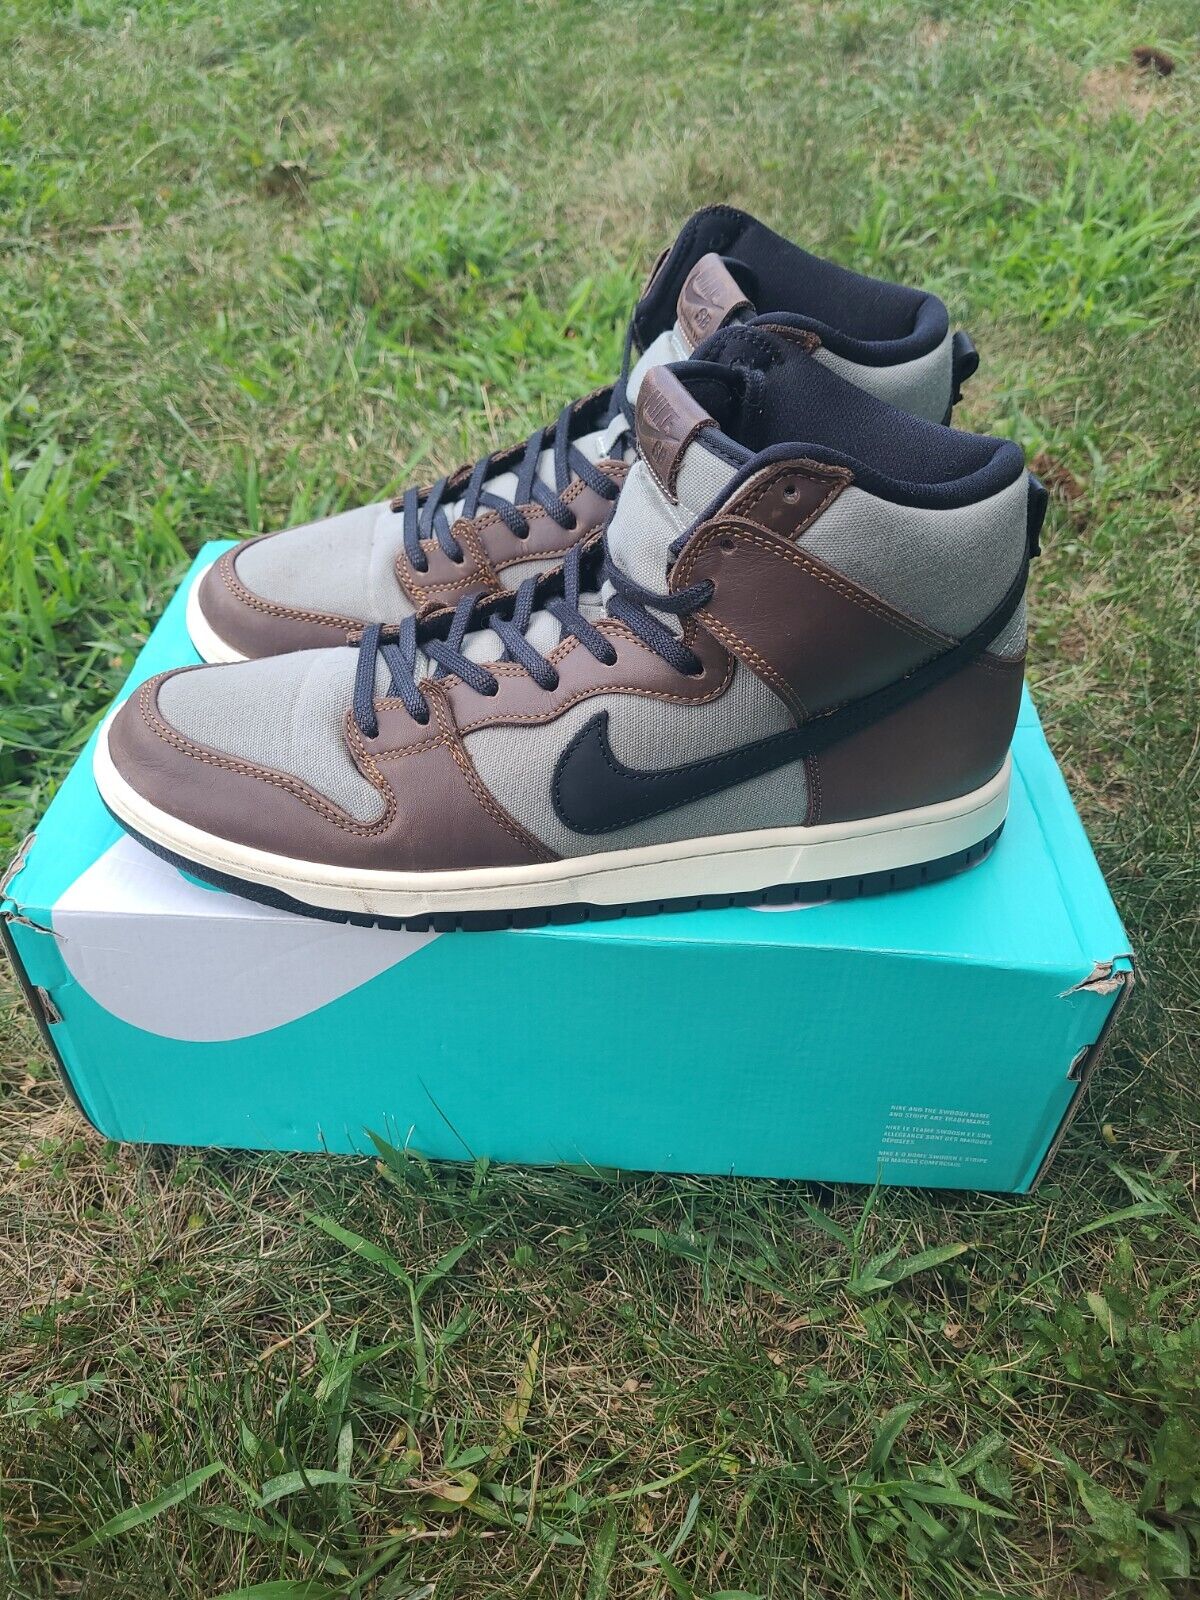 Nike Dunk SB High Pro Baroque Brown photo review